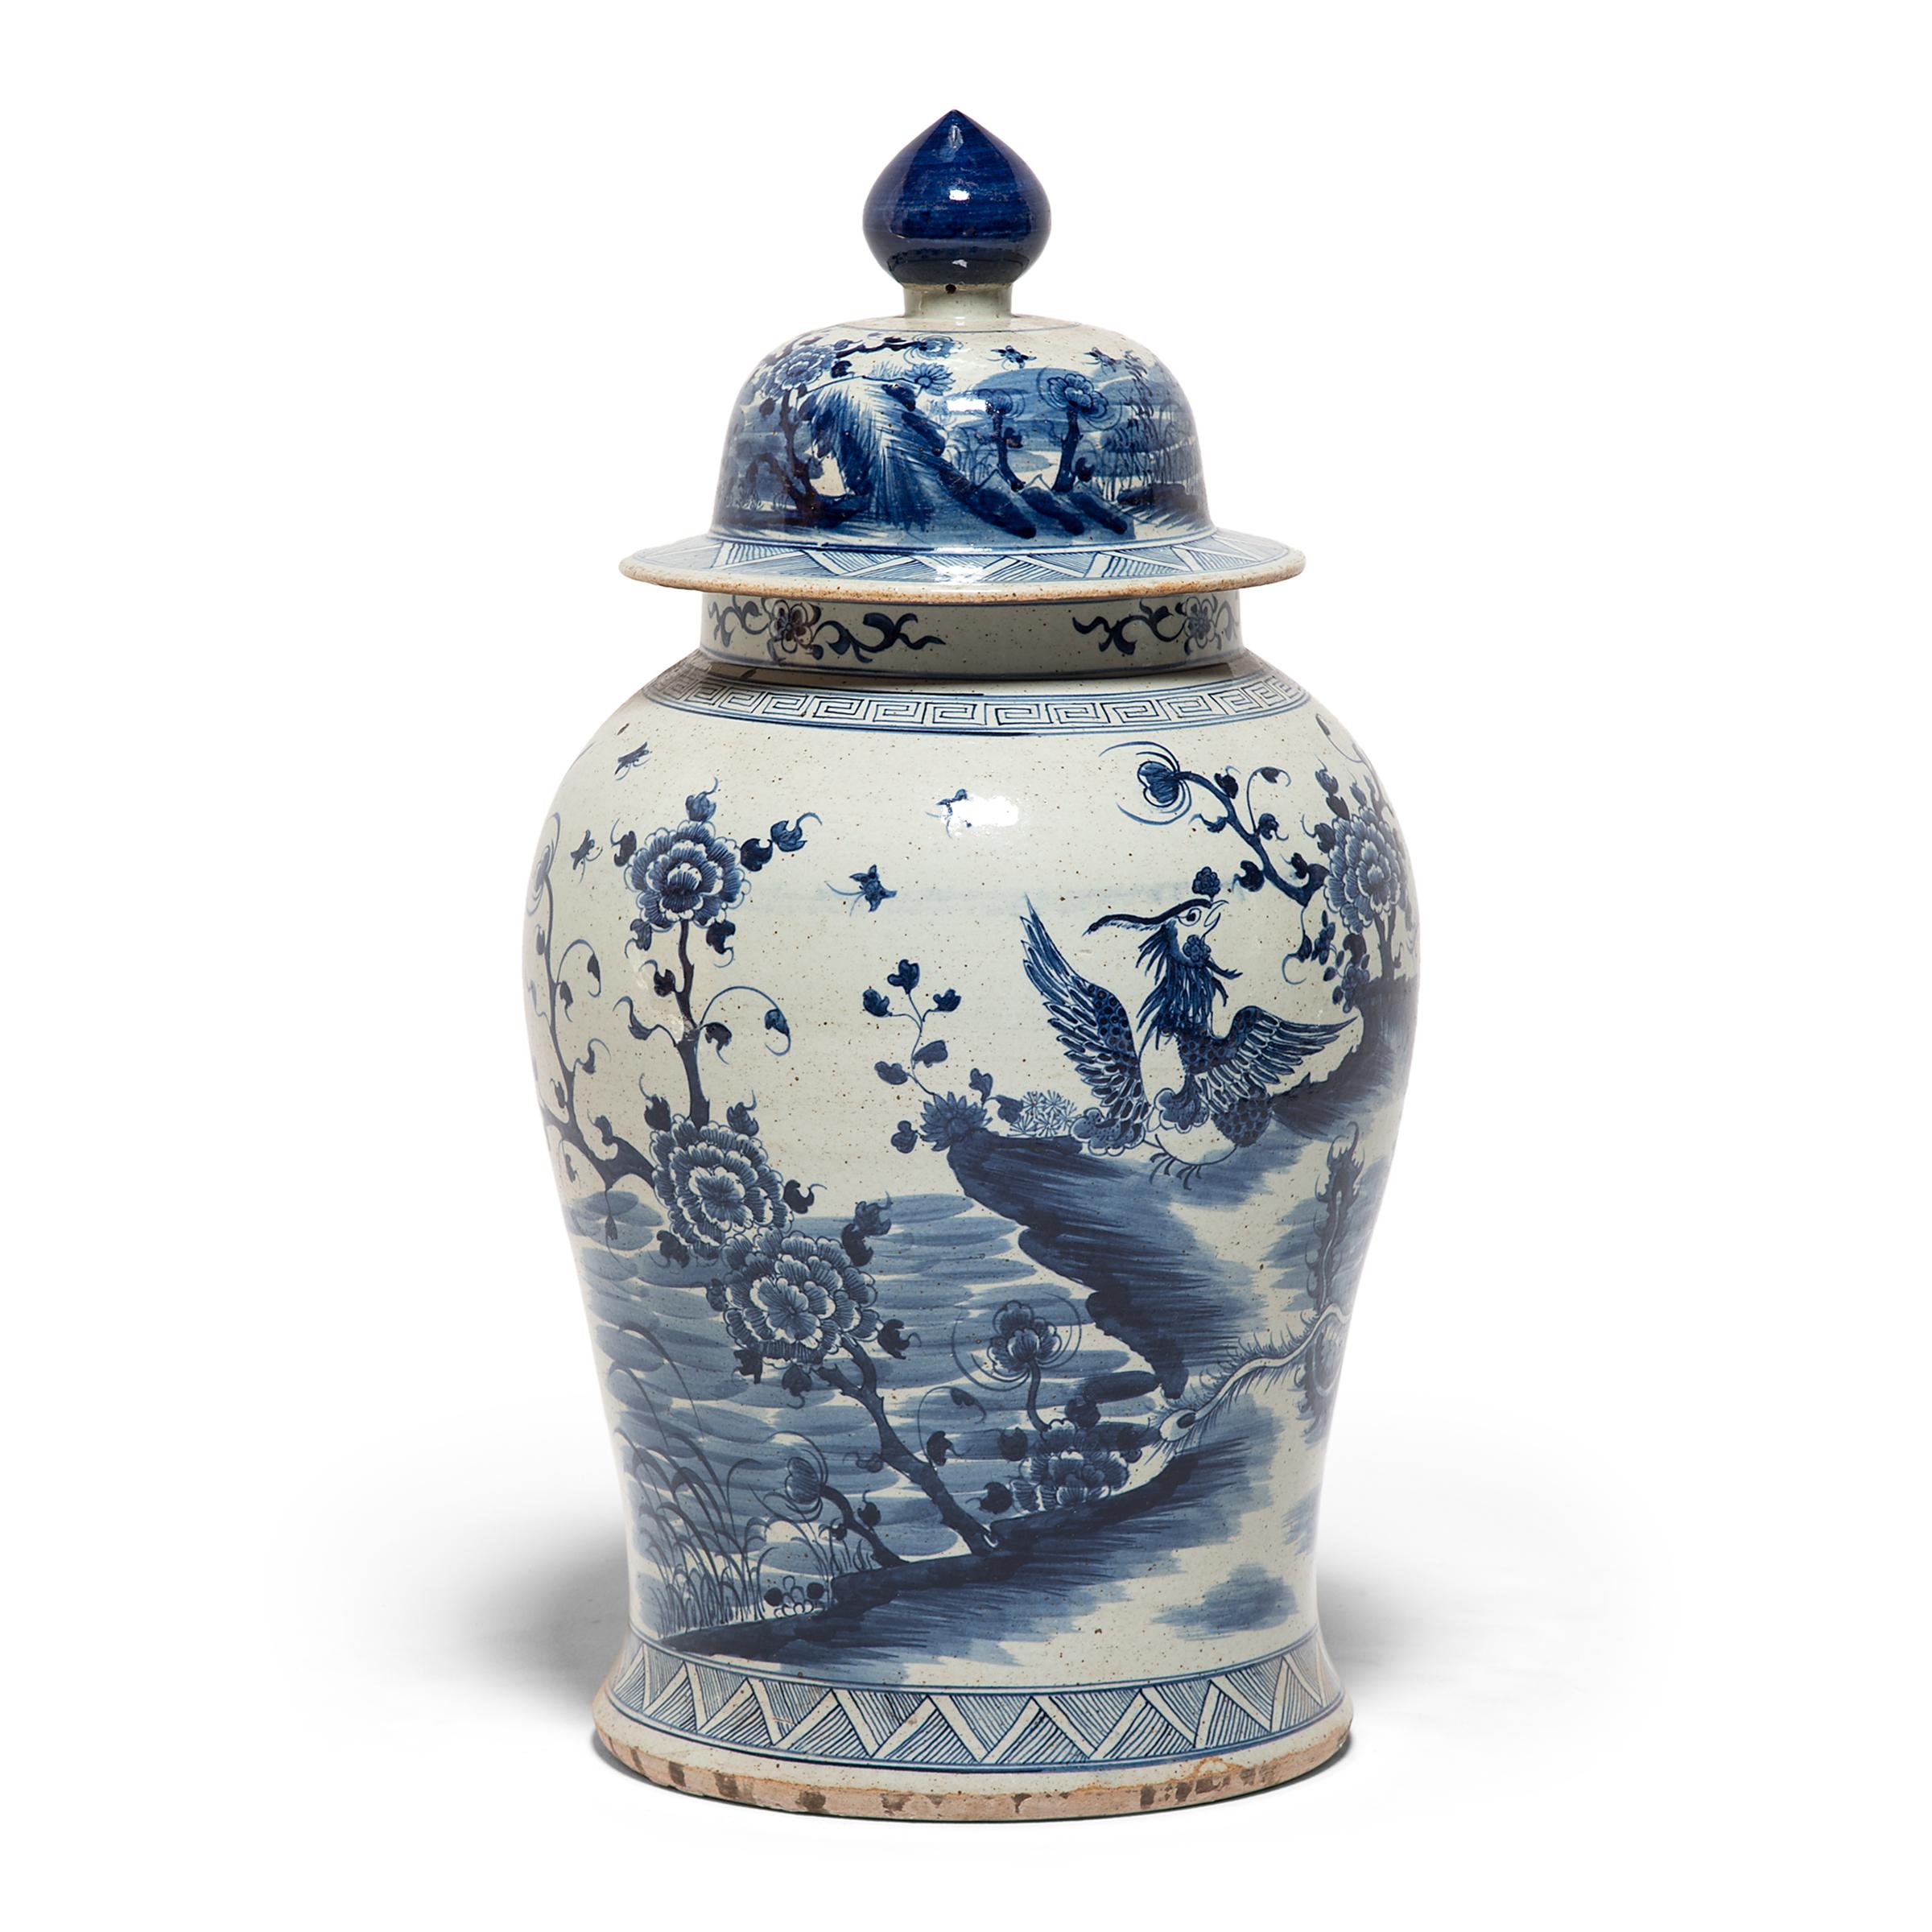 This grand baluster jar from Jiangxi province is a continuation of a centuries-old tradition of Chinese blue-and-white porcelain ware. Painted with expressive brushwork, the jar is festooned with peony blossoms, emblems of spring time and feminine